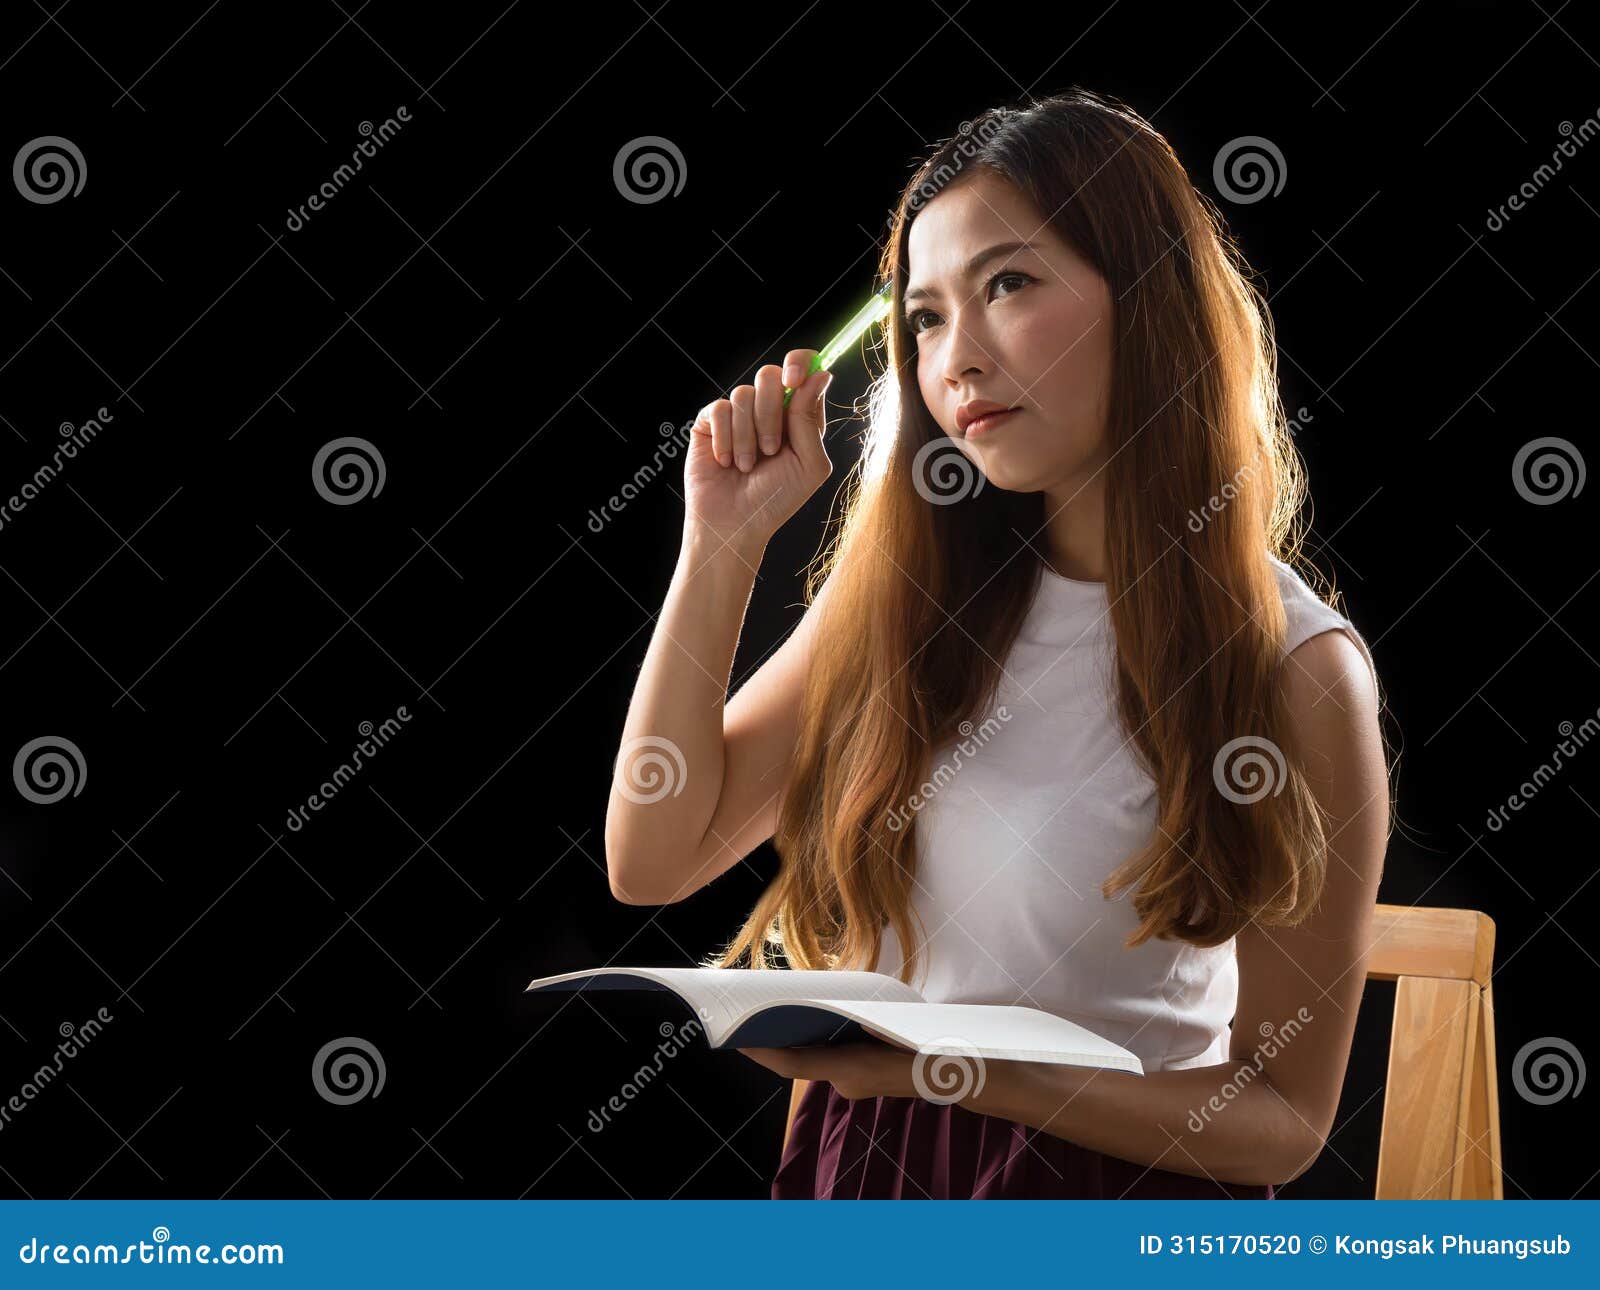 with a pen held pensively to her face, a young woman is deeply engrossed in a book, lost in thought and contemplation